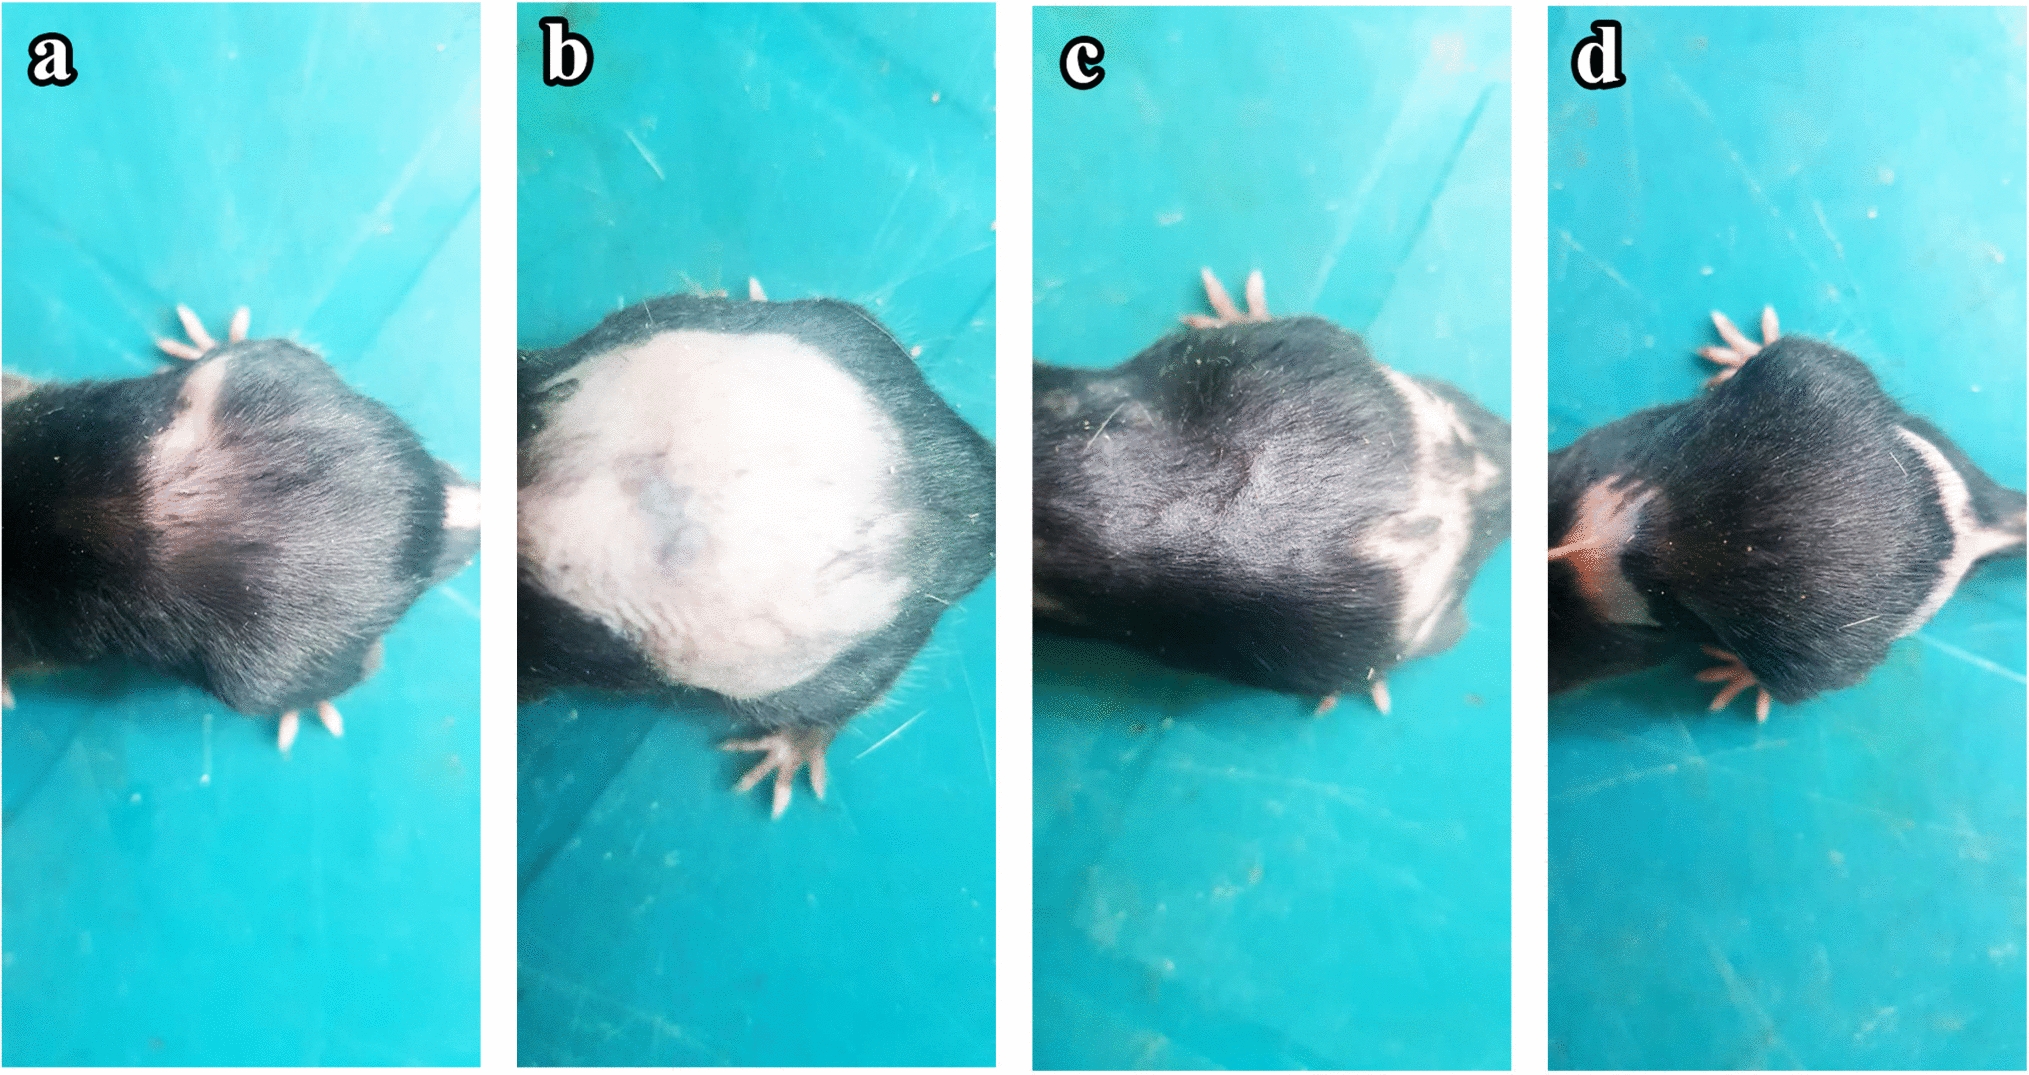 Effect of N-acetylcysteine on hair follicle changes in mouse model of cyclophosphamide-induced alopecia: histological and biochemical study